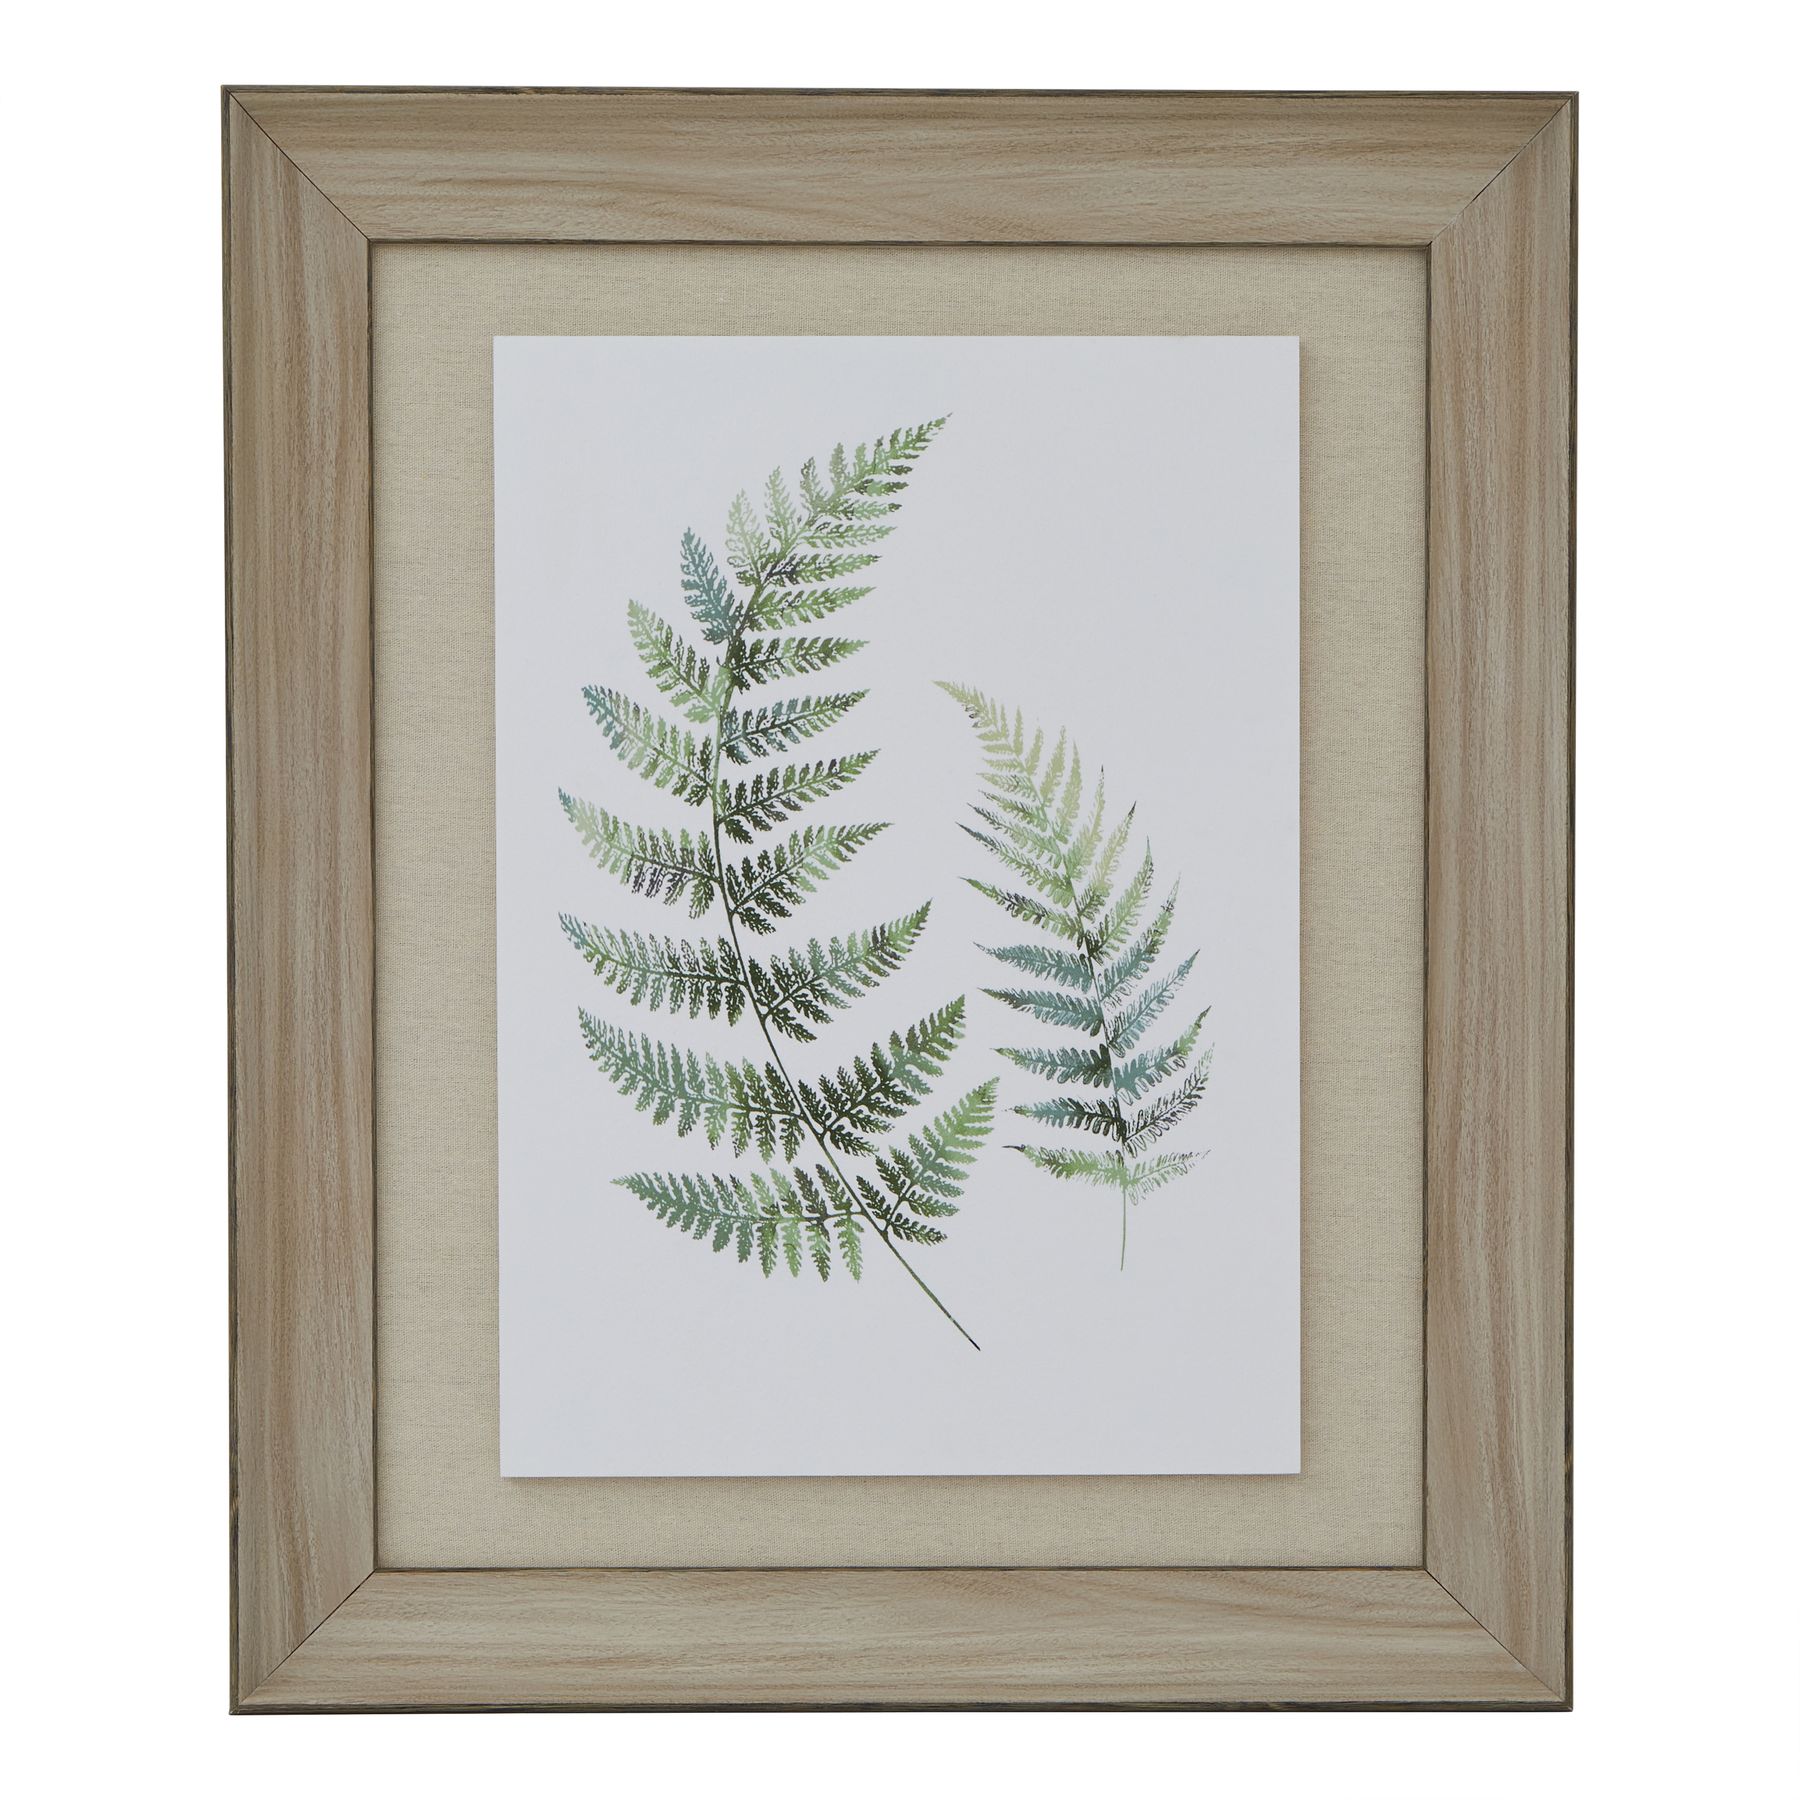 Watercolour Fern Duo In Washed Wood Frame - Image 1